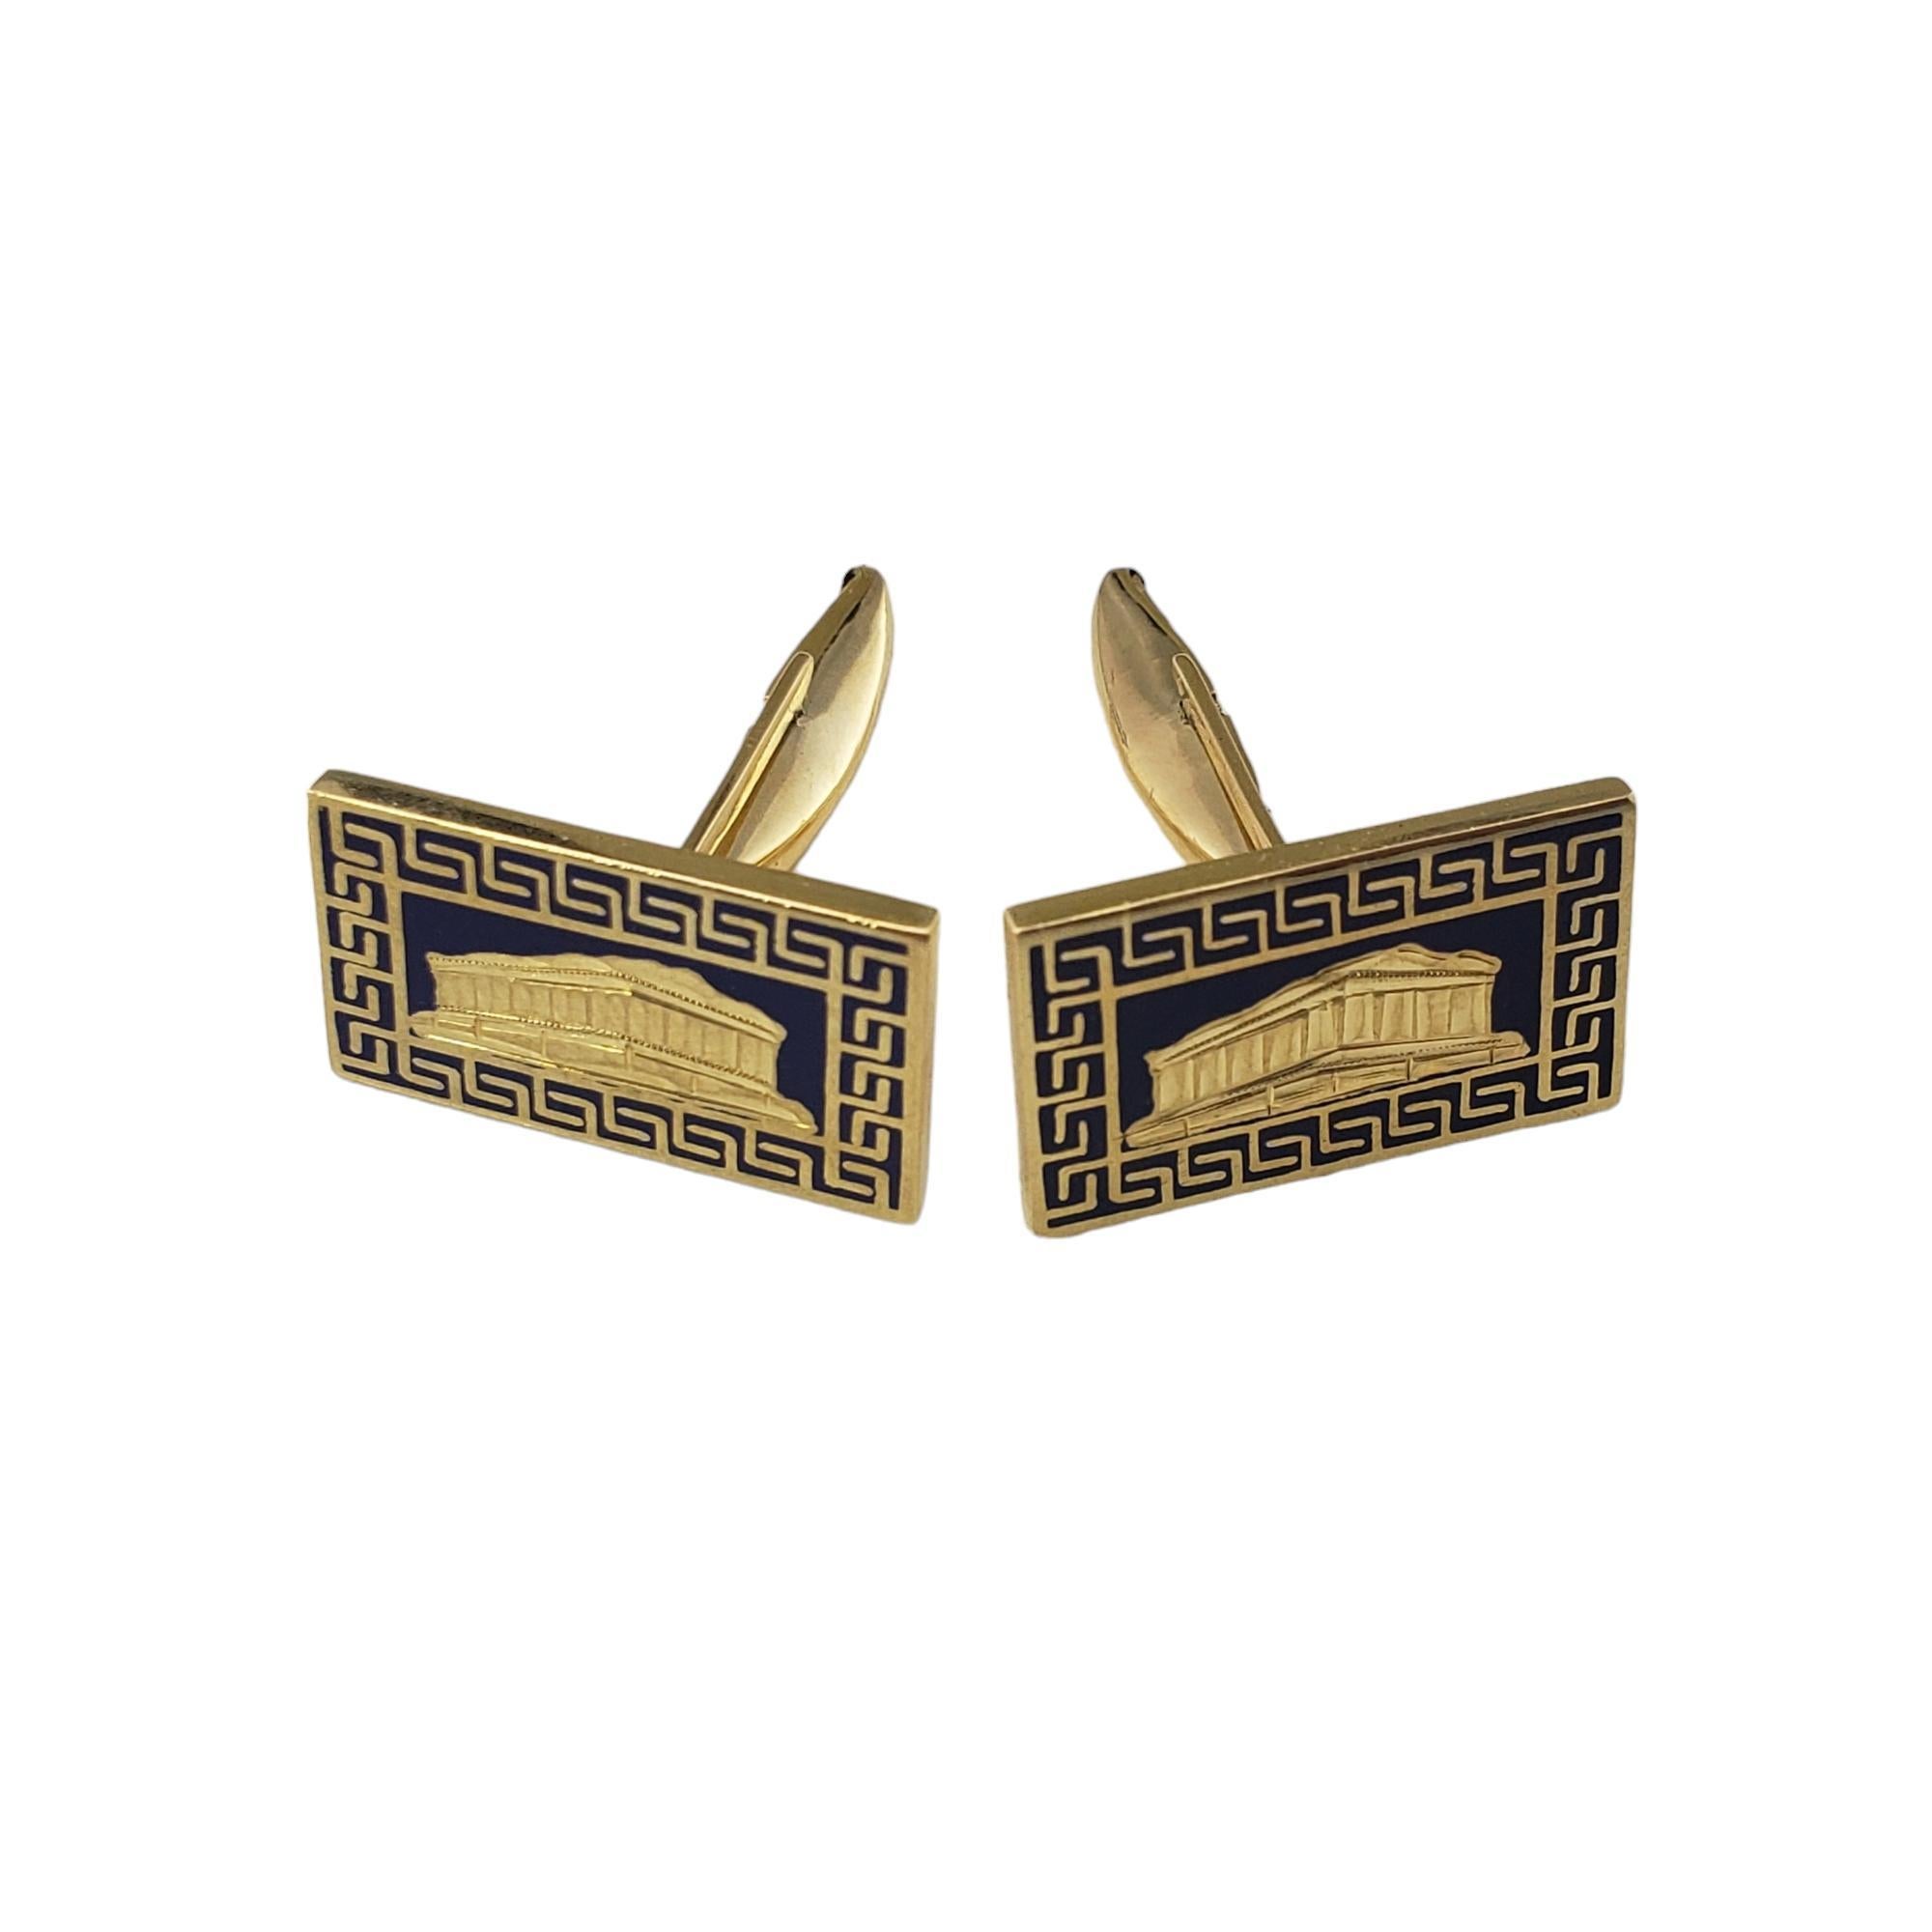 Vintage 18 Karat Yellow Gold Parthenon Cufflinks-

These stunning cufflinks depicts the iconic Parthenon in Greece, a temple which stands as a monument to democracy.  Beautifully detailed in blue enamel and 18K yellow gold.

Size:  21.0 mm x 12.7